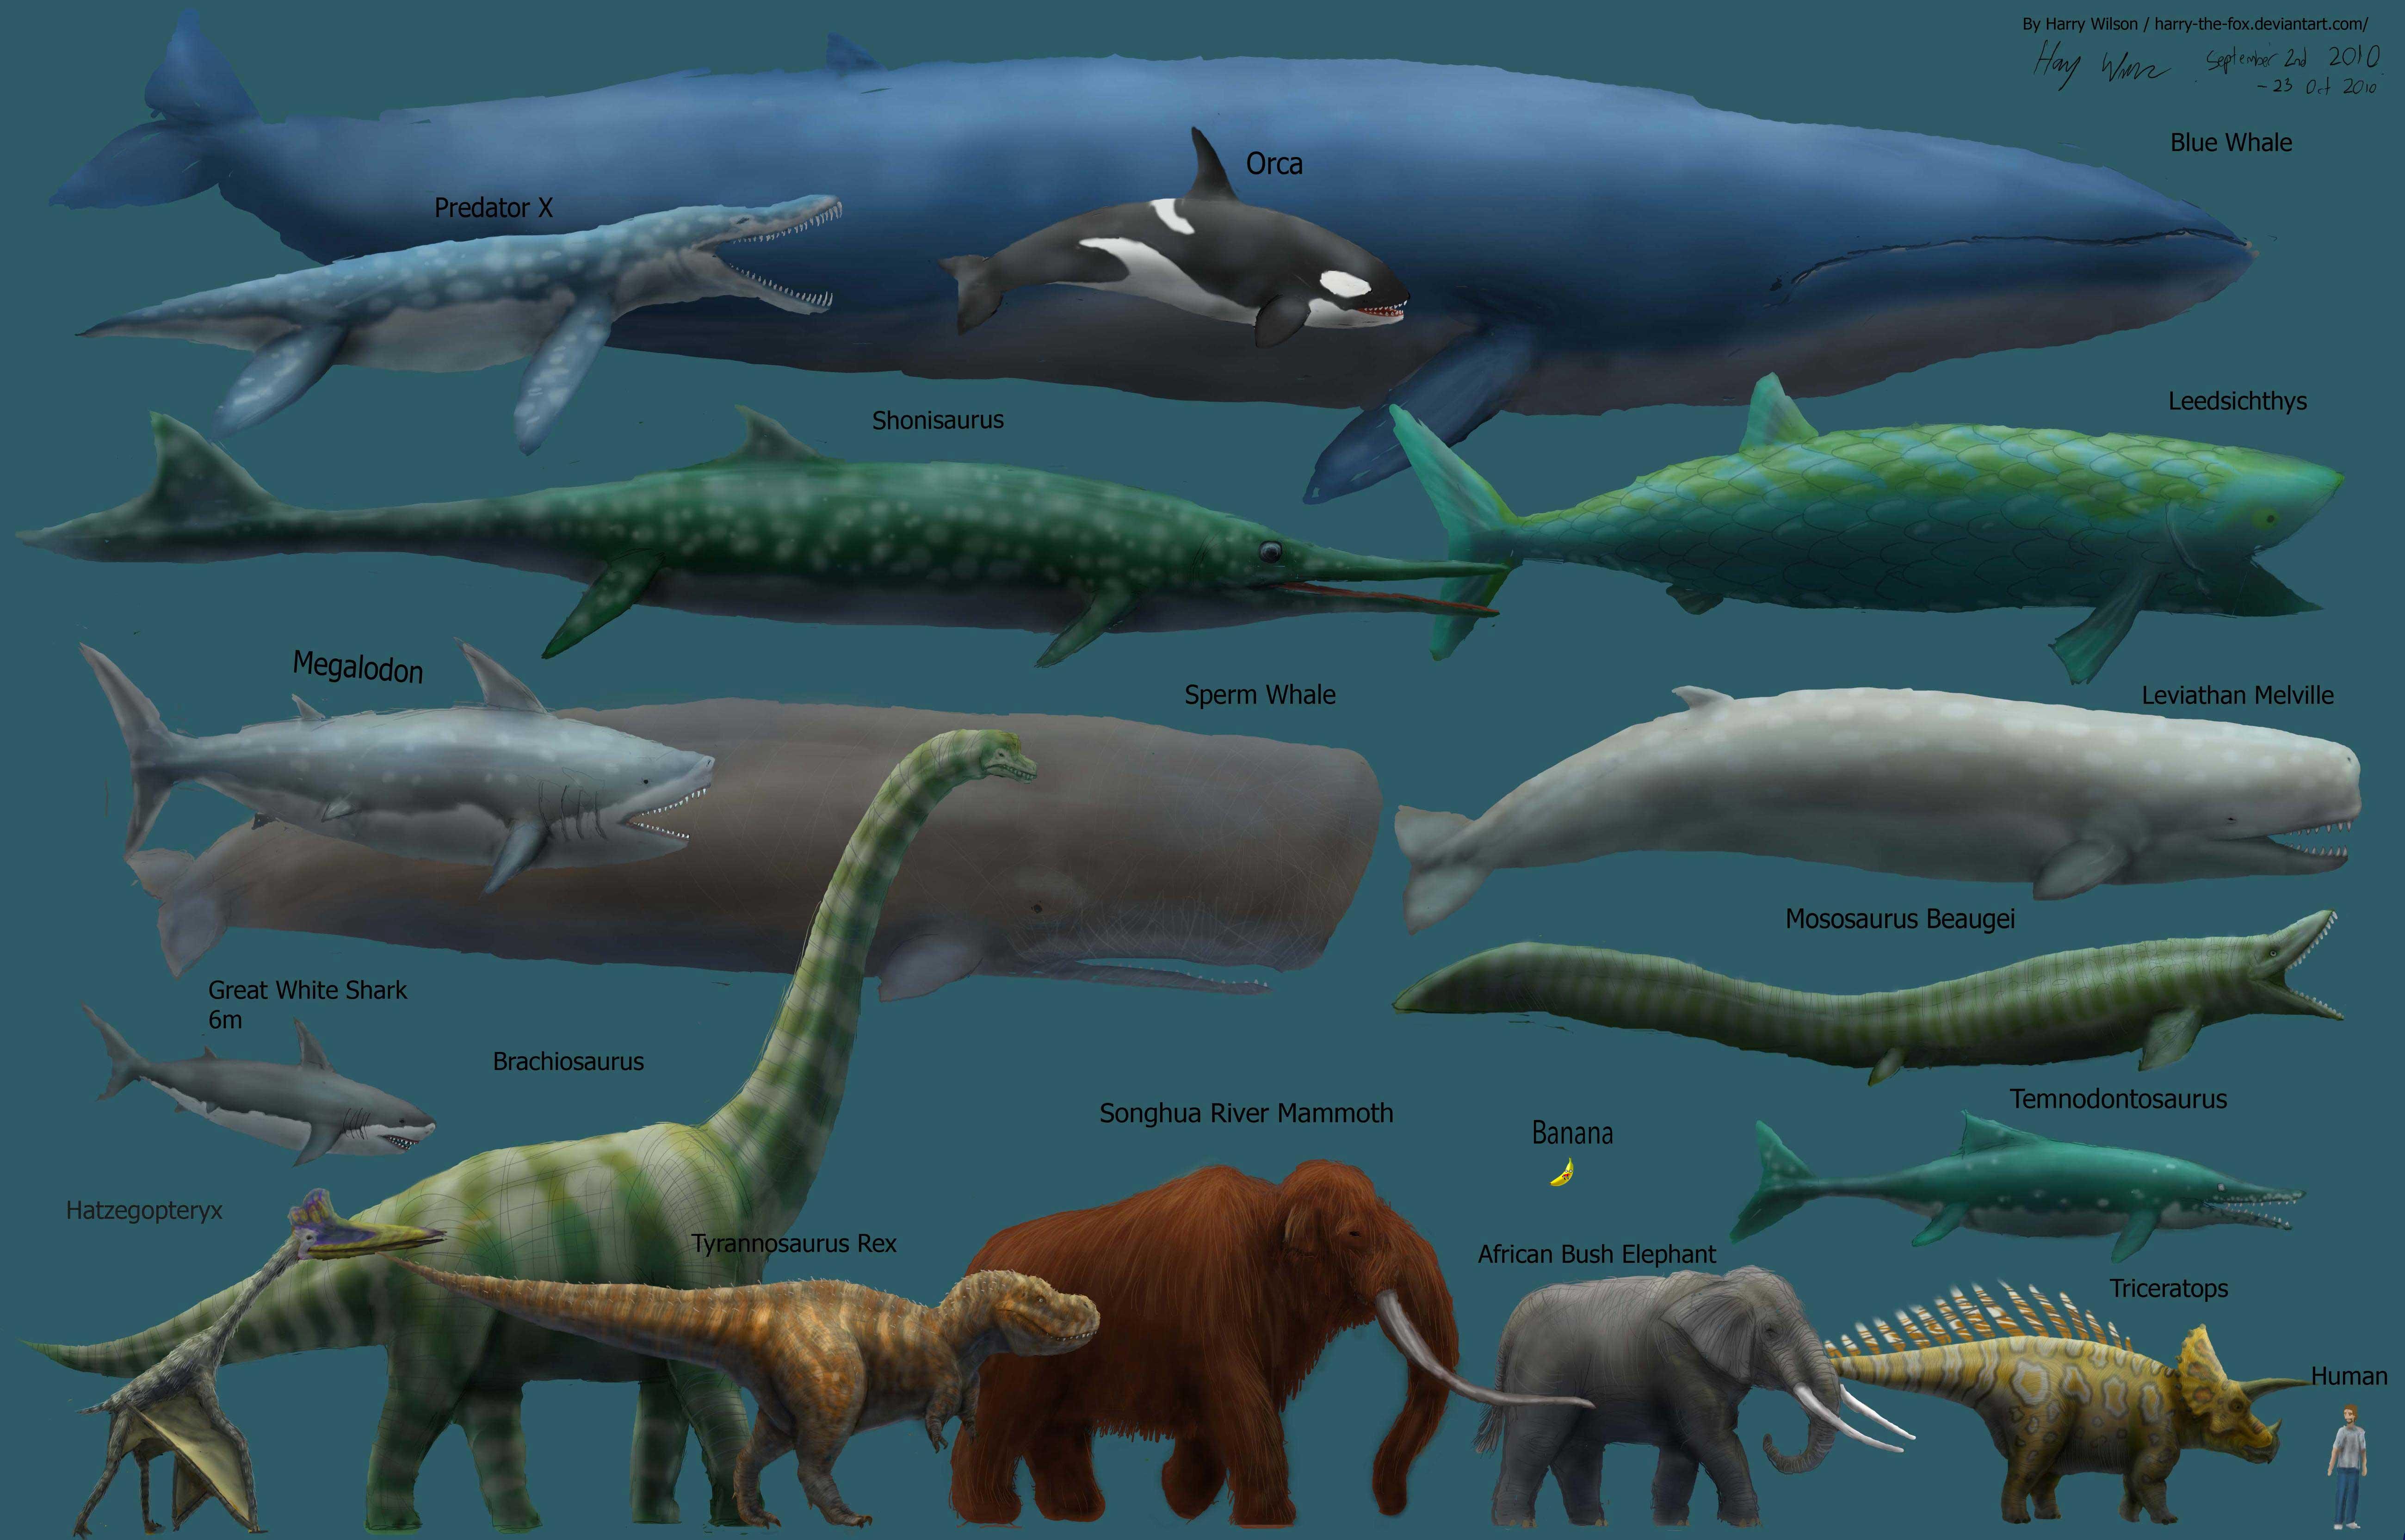 Elephant, blue whale and other large circular animals